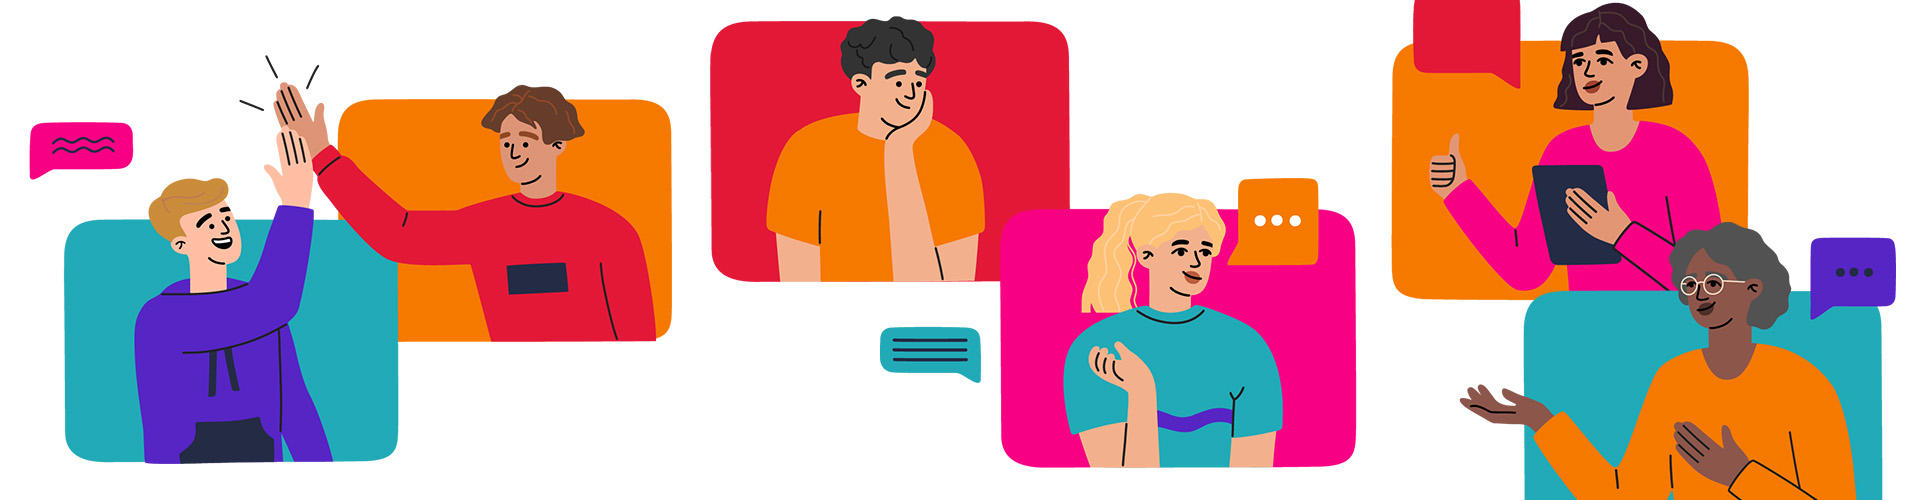 Shoppers Reveal Many Paths to Purchase Report Banner featuring vector illustrations of diverse people conversing in rounded boxes